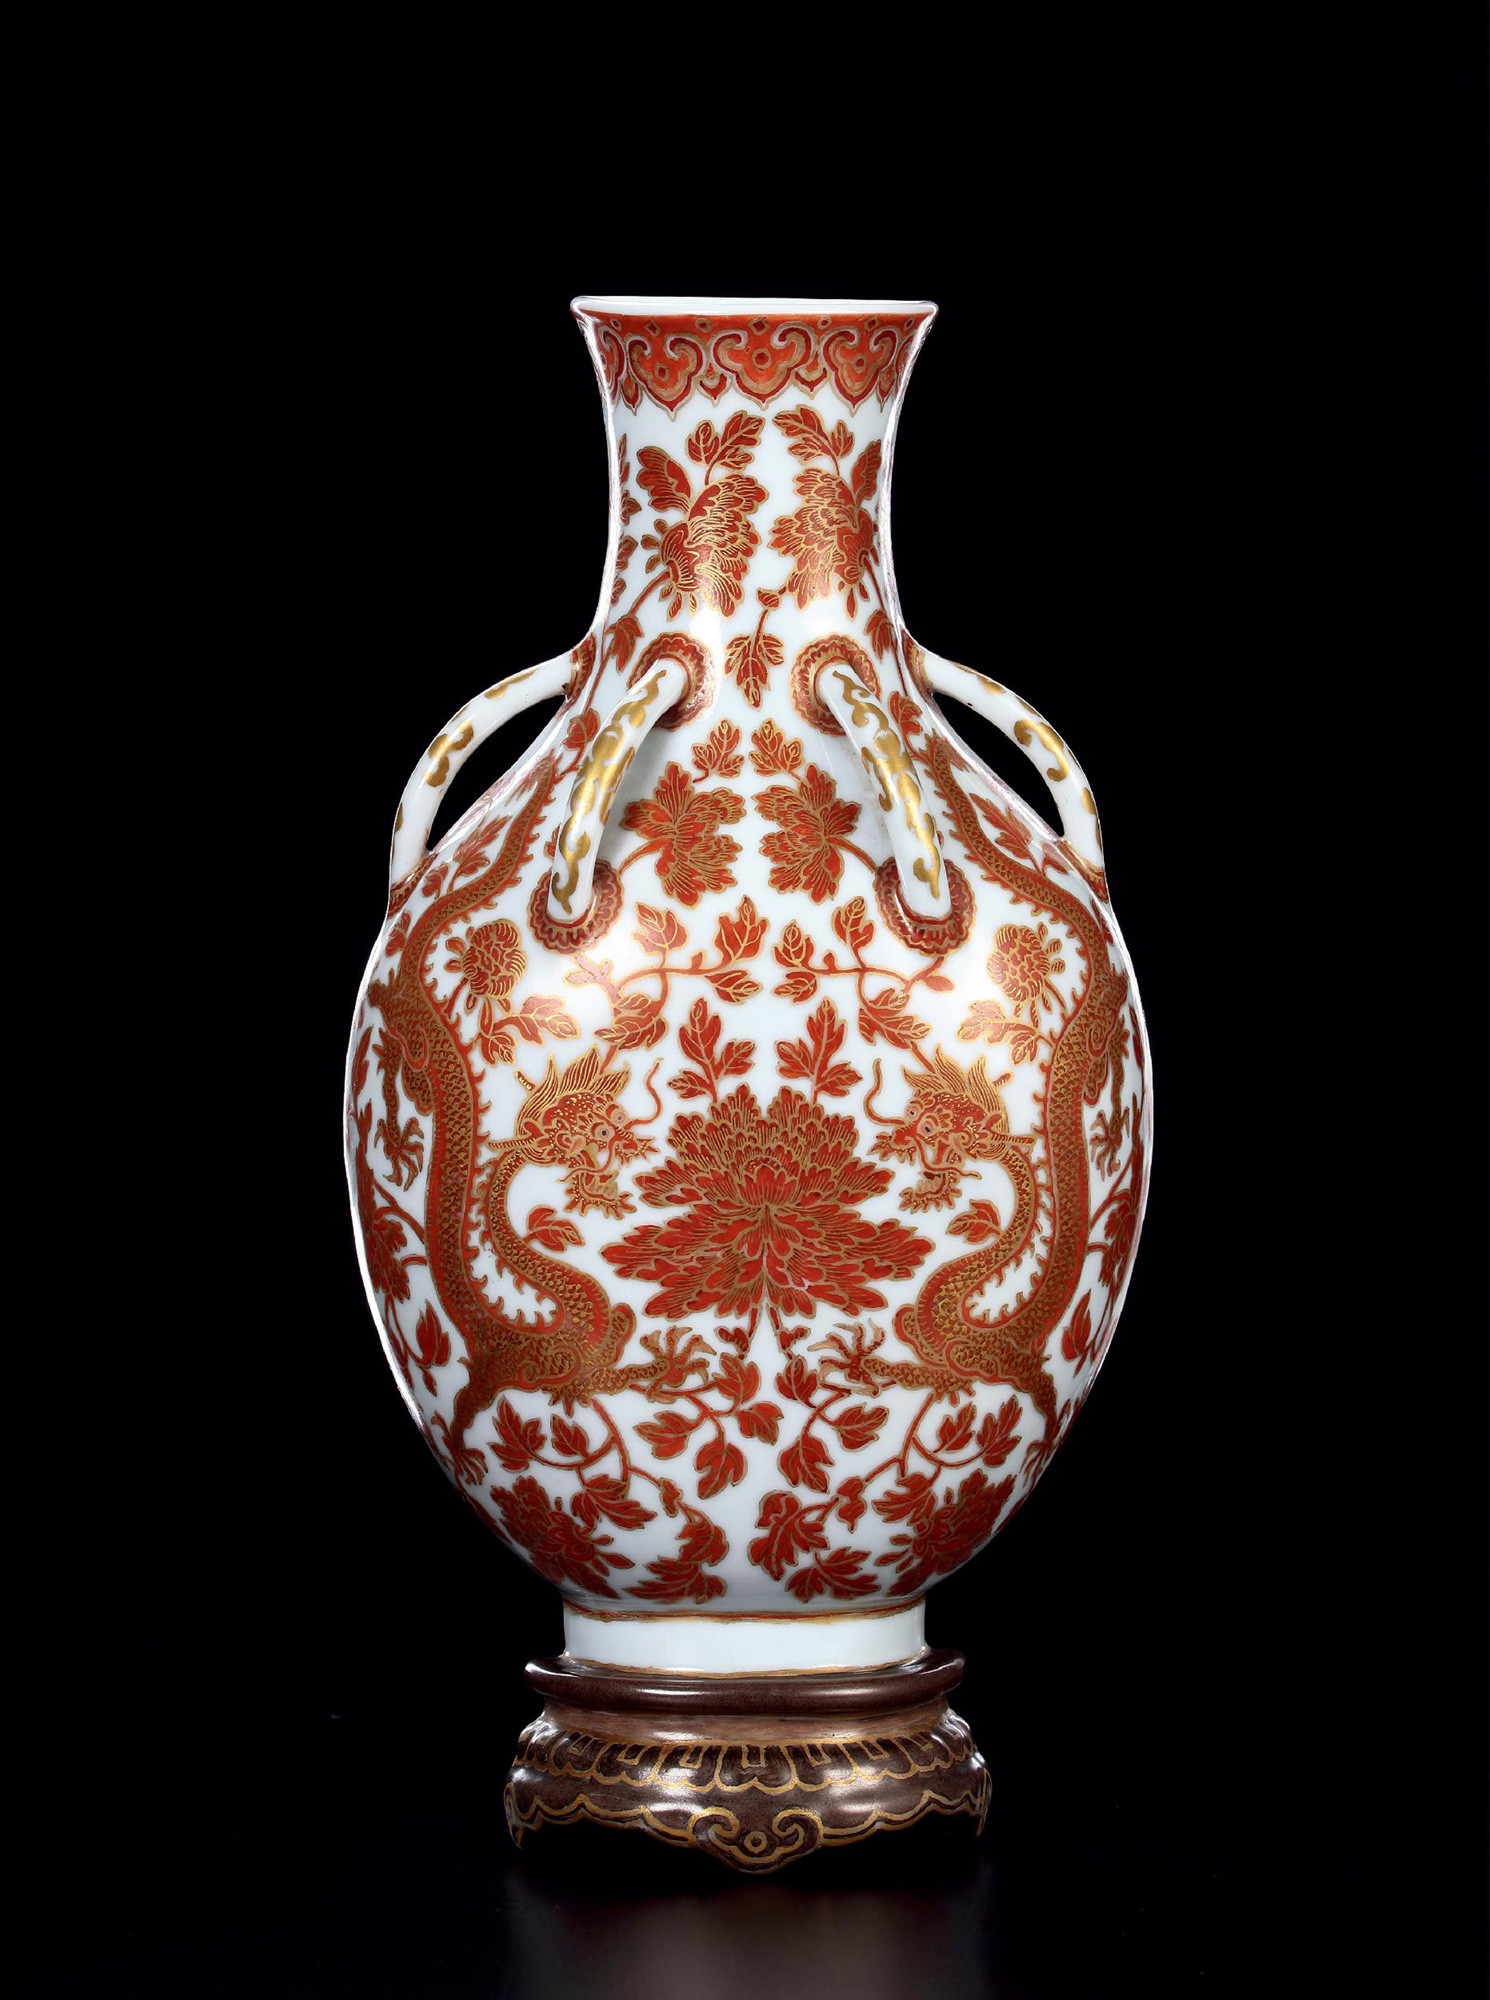 AN UNUSUAL IRON-RED GILTED GOLDEN"DOUBLE DRAGON”WALL VASE